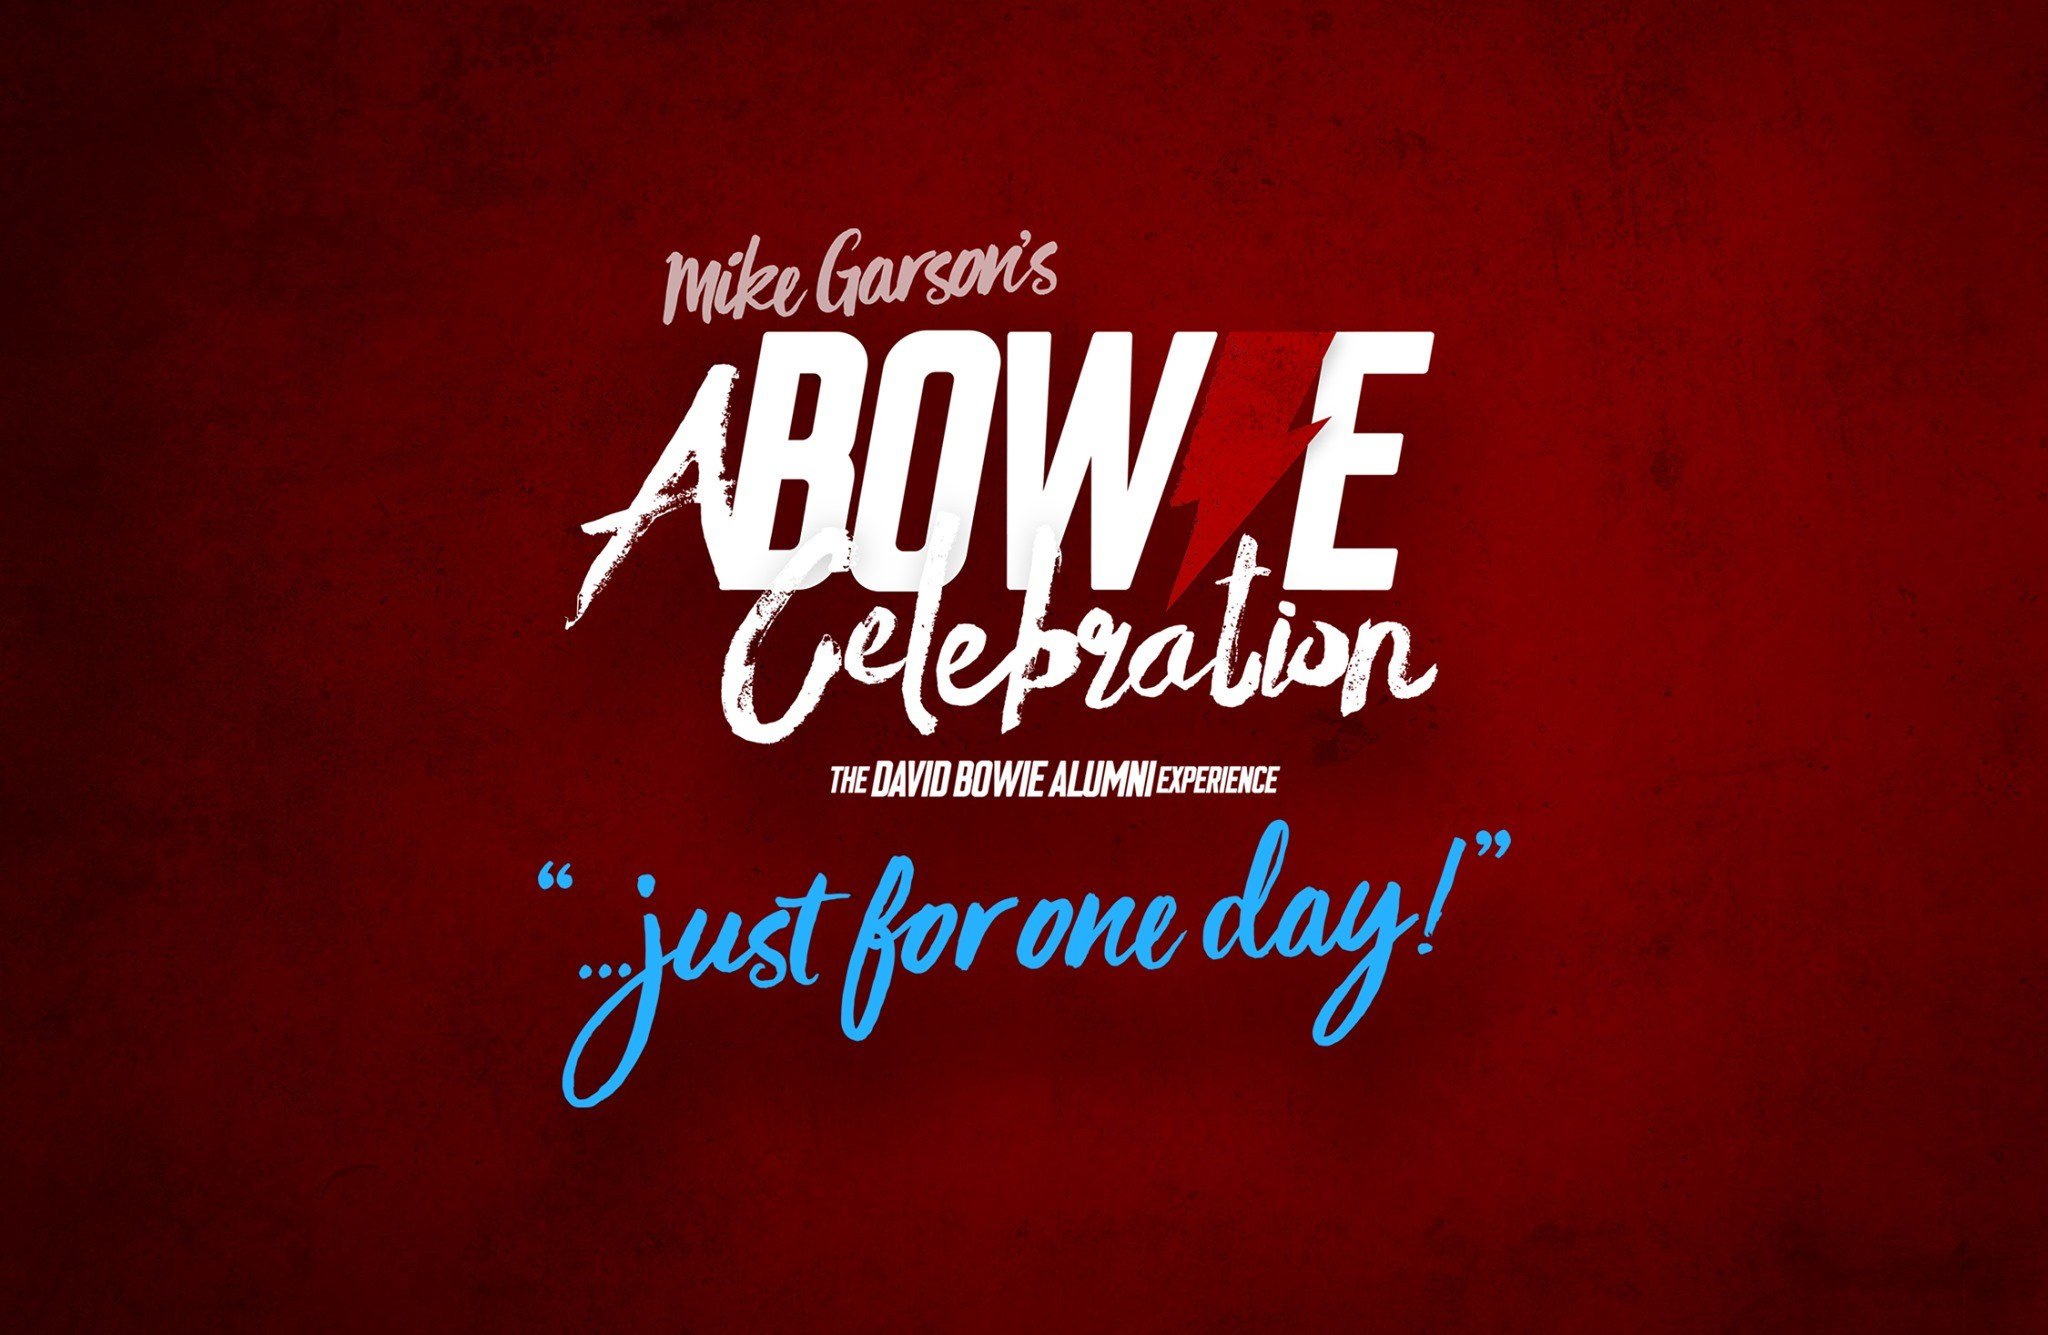 A Bowie Celebration: Just for one day